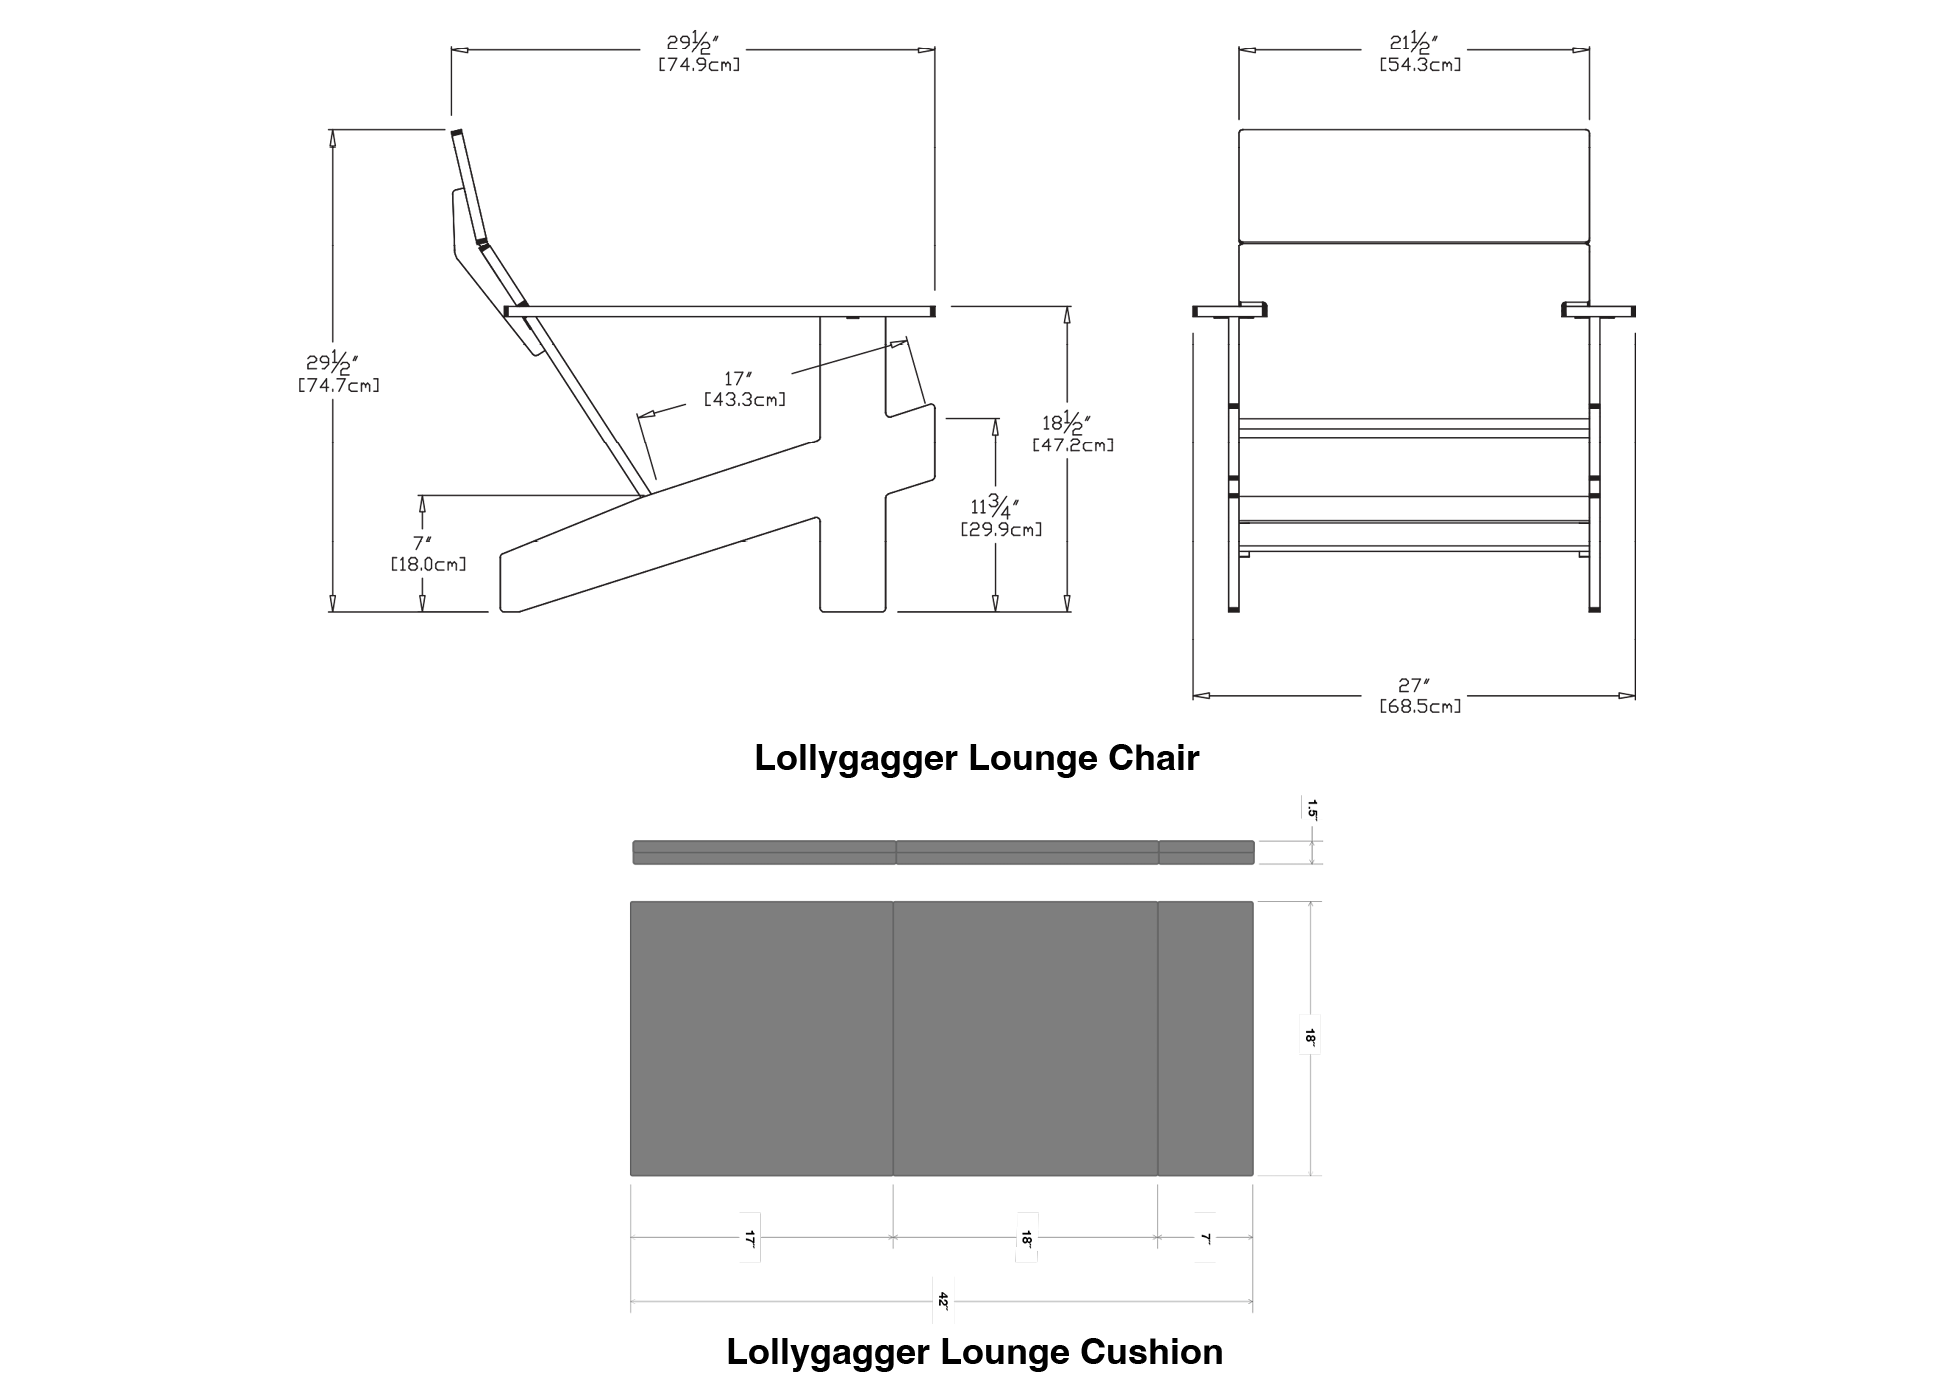 Black Lollygagger Lounges + Charcoal Lollygagger Lounge Cushions Bundle Dimensions